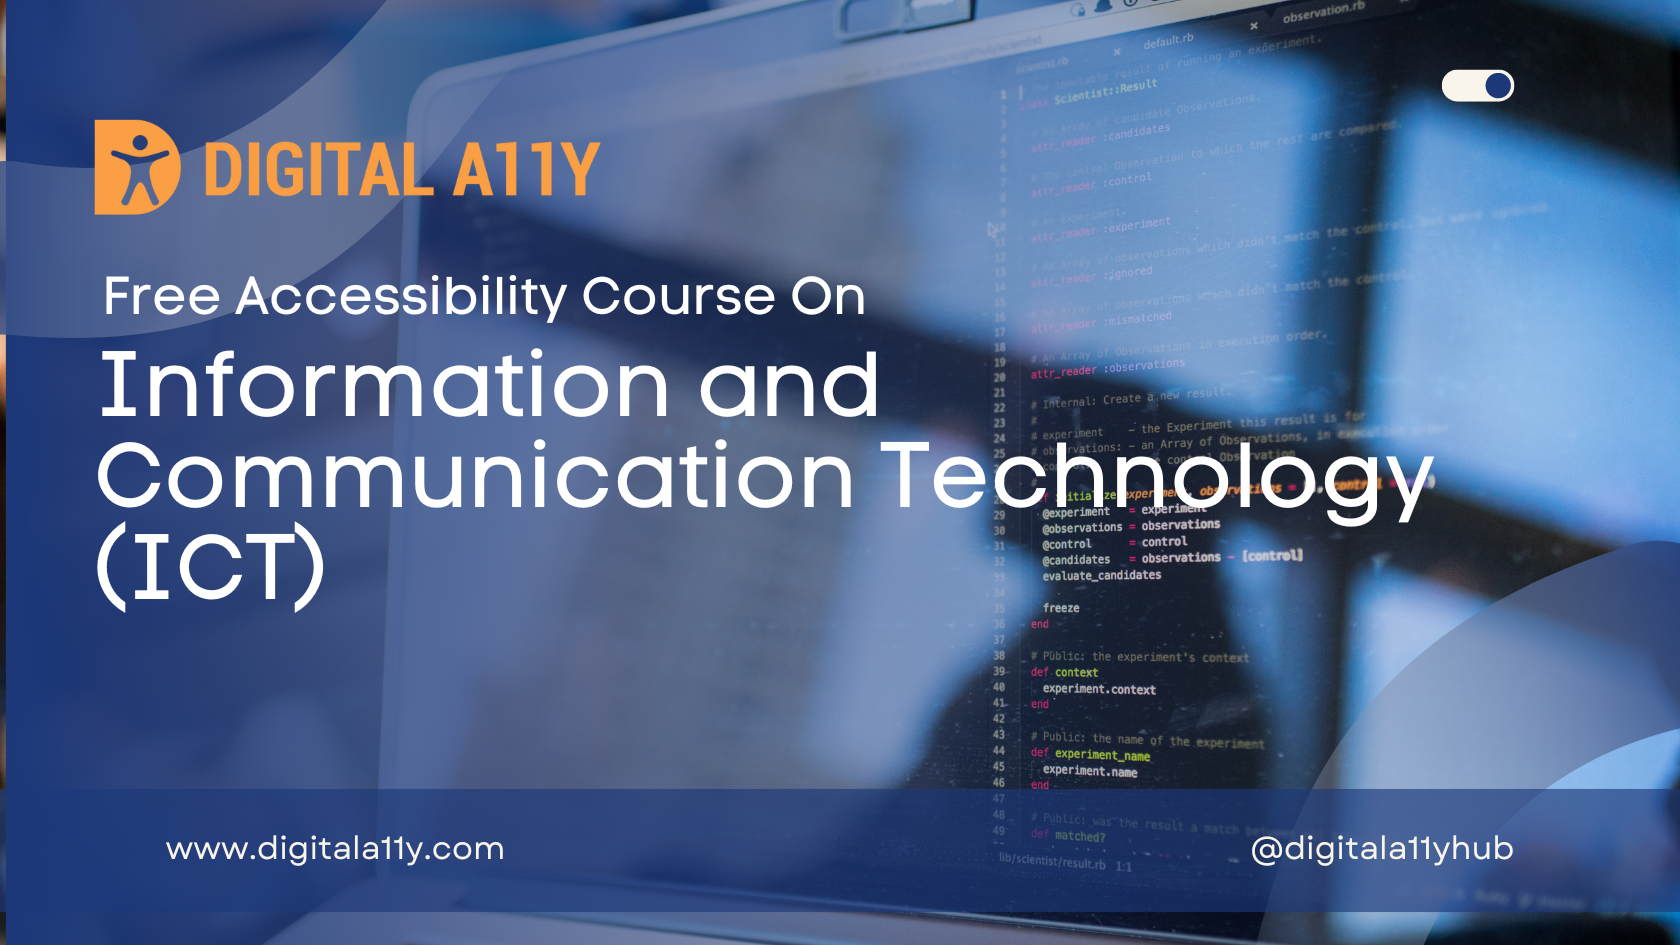 Free Accessibility Course On Information and Communication Technology (ICT)